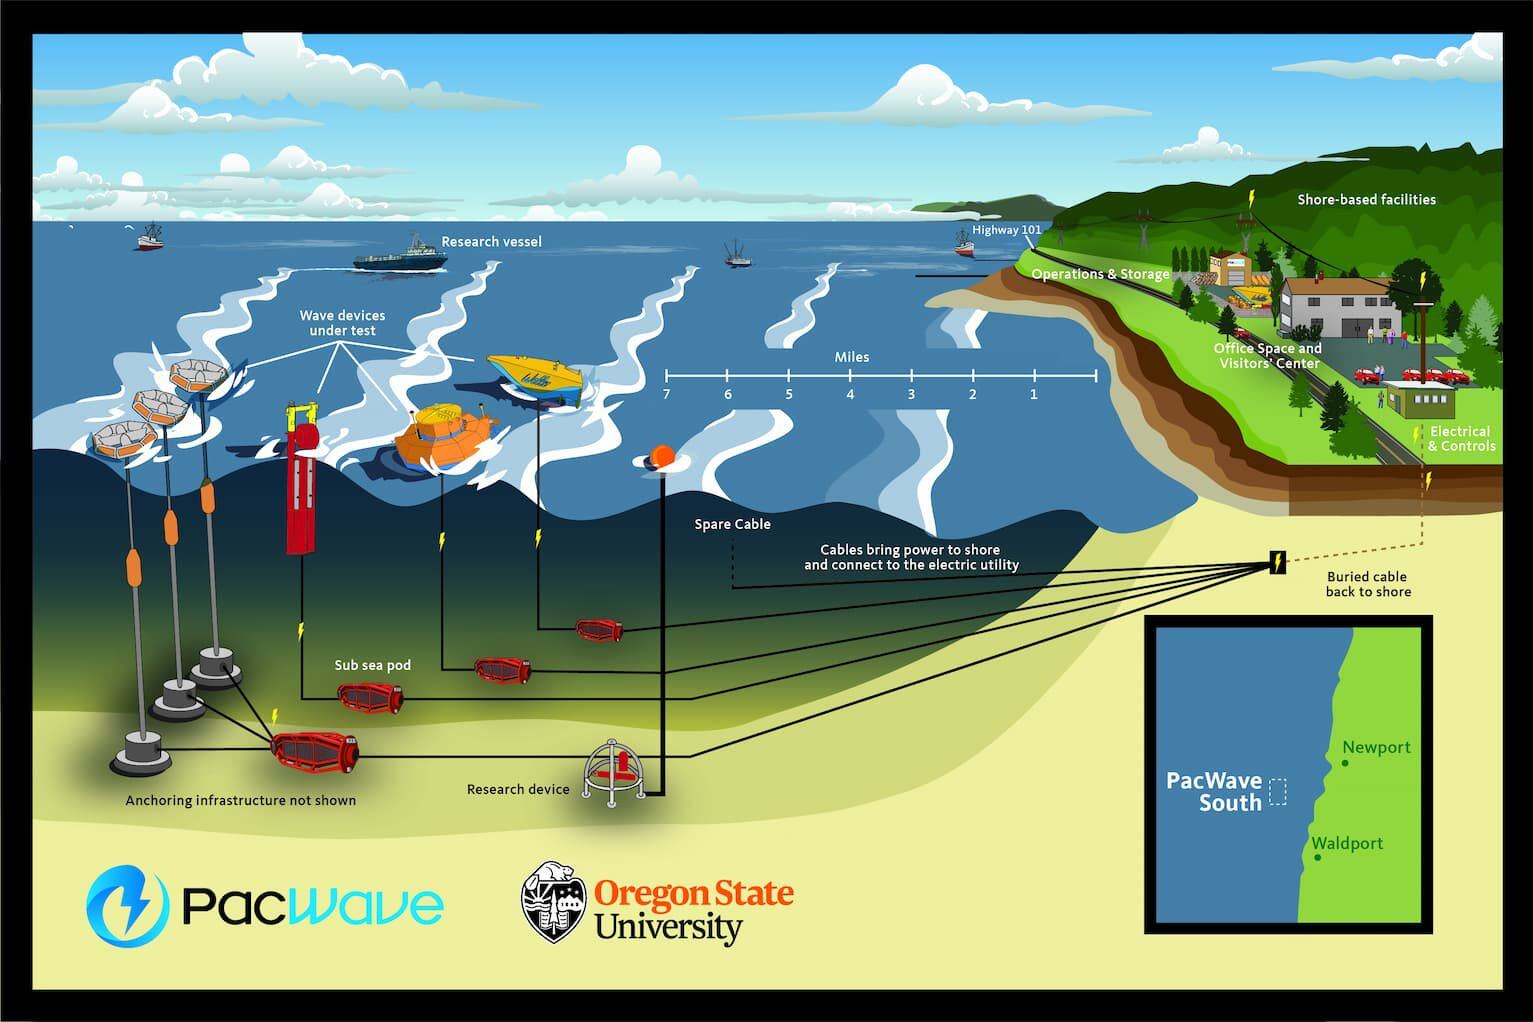 A digital rendition of the PacWave South wave energy testing site near Newport.